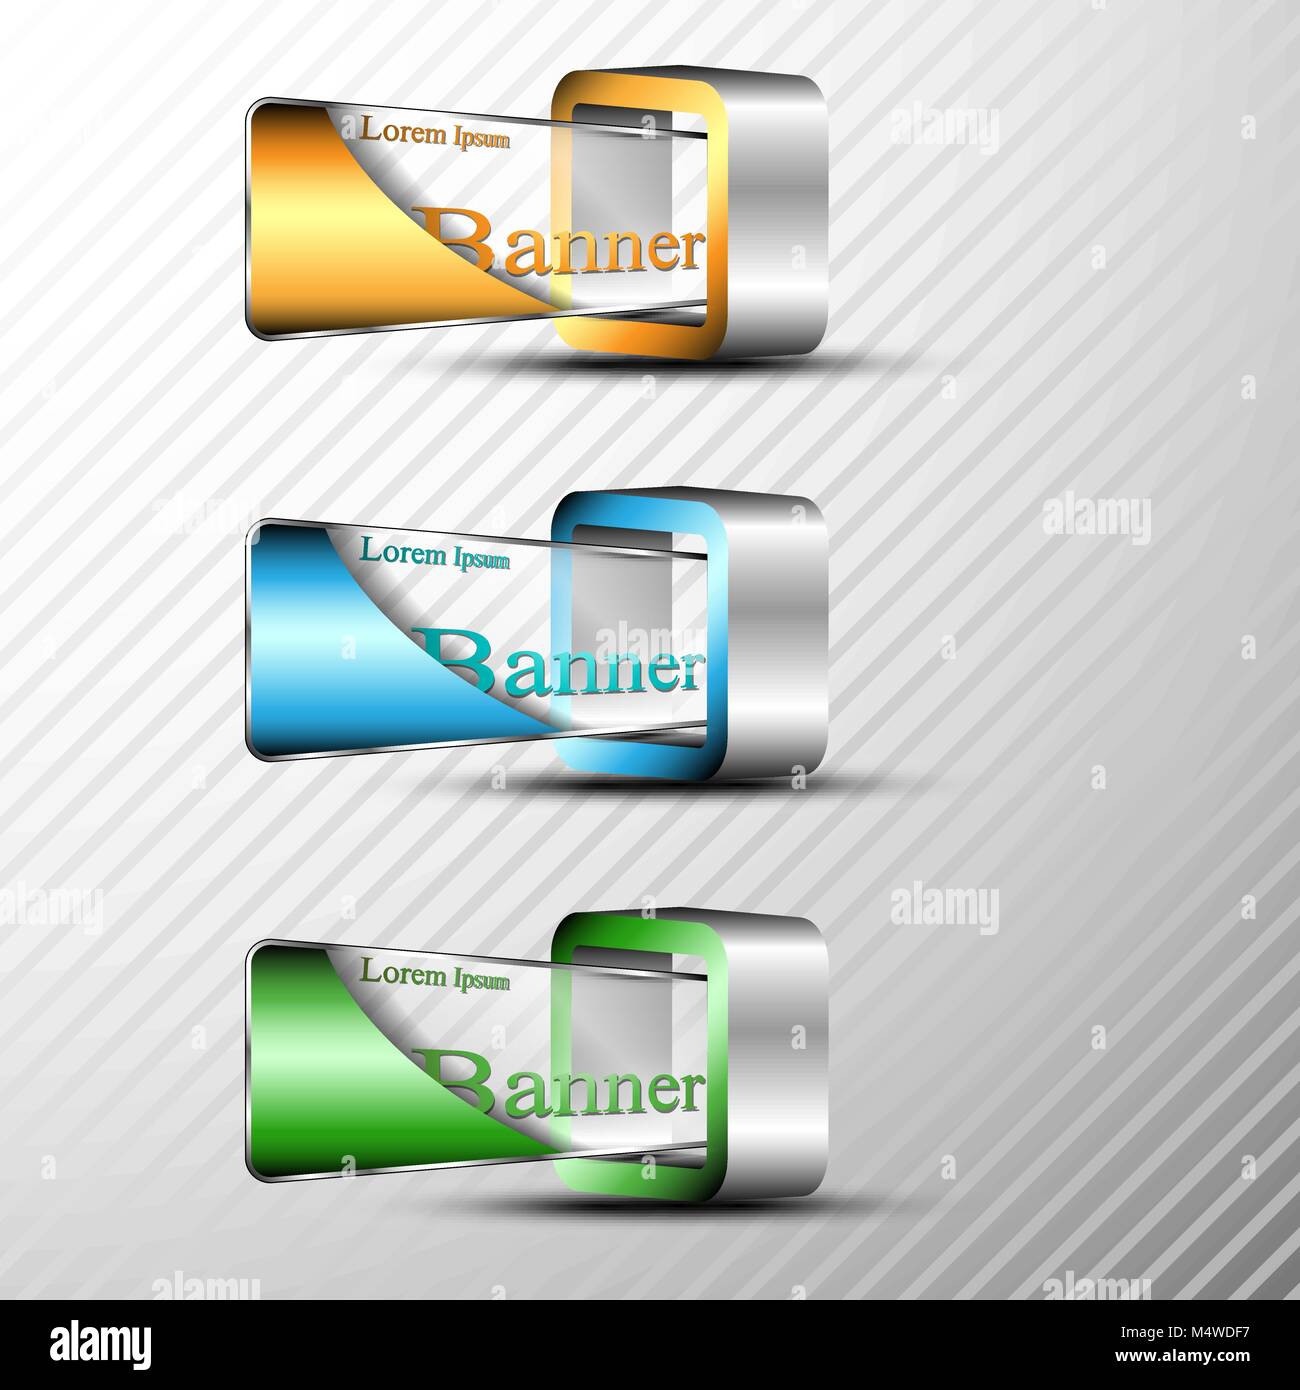 Set of 3d banners template. Stock Vector